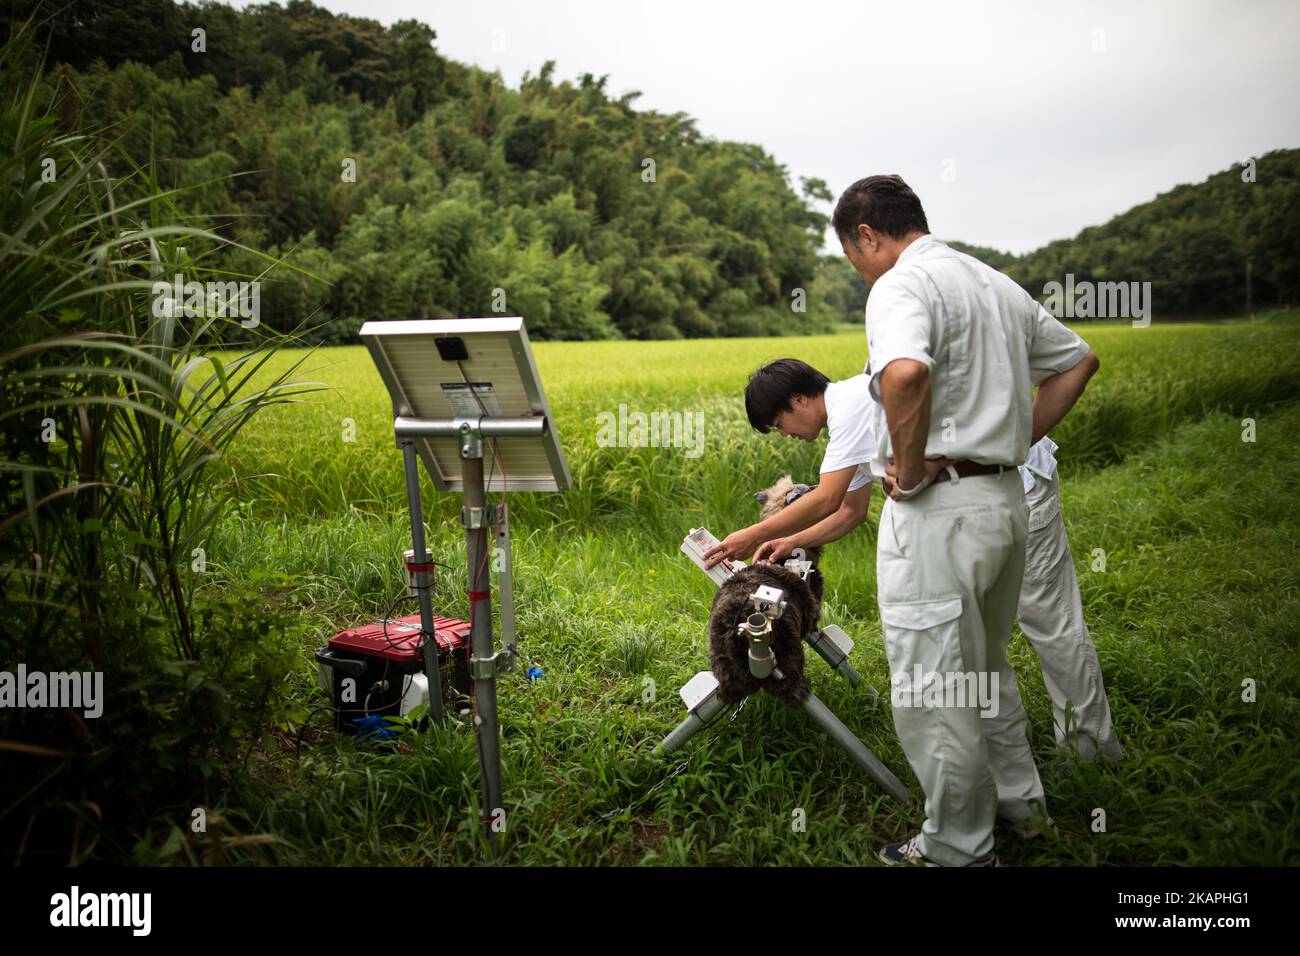 Members of JA Kisarazu-shi, shows a robot named 'Super Monster Wolf' a solar powered robot designed to scare away wild animals from farmer’s crops in Kisarazu, southwestern Chiba Prefecture, Japan on August 10, 2017. (Photo by Richard Atrero de Guzman/NUR Photo) *** Please Use Credit from Credit Field *** Stock Photo